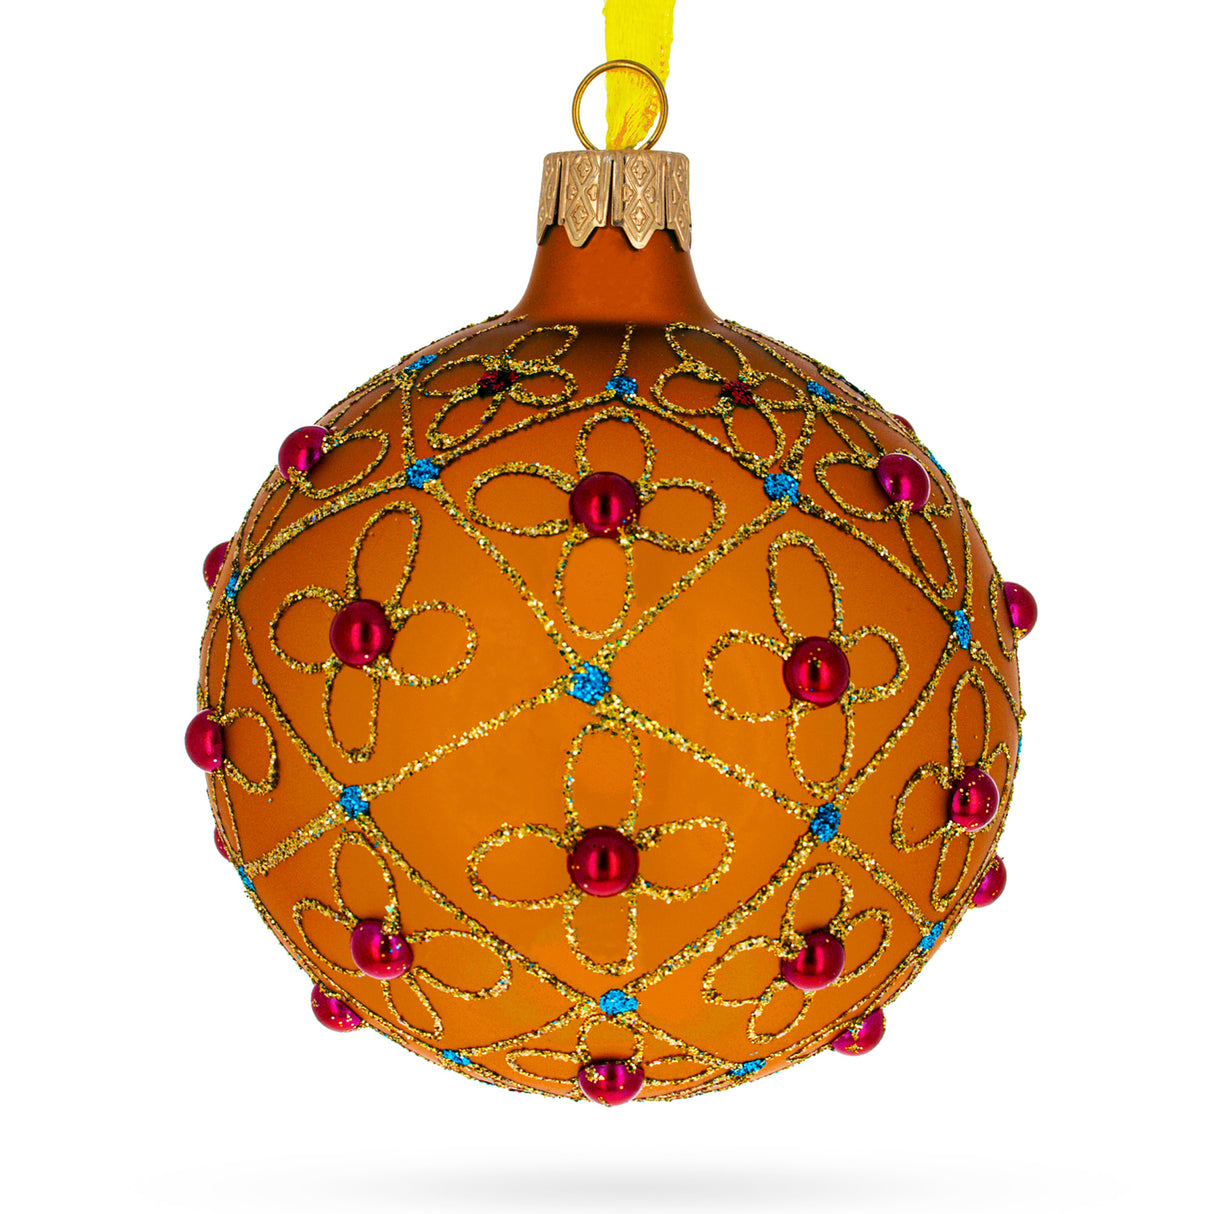 Glass Luxurious Design: Jeweled Crosses on Gold Blown Glass Ball Christmas Ornament 3.25 Inches in Orange color Round